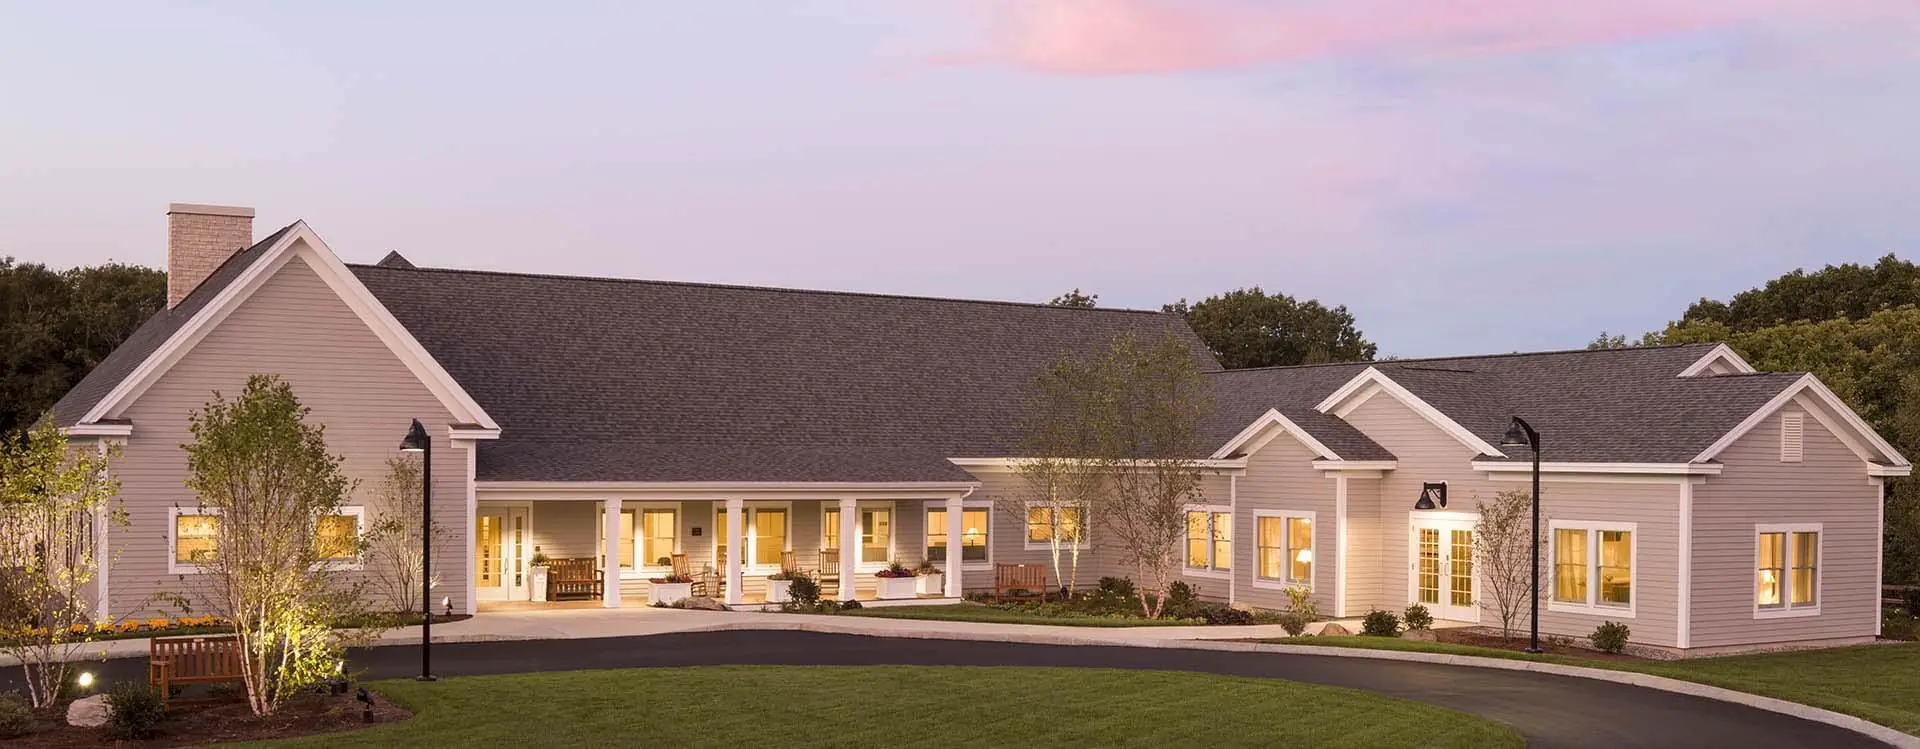 Photo of Quarry Hill, Assisted Living, Nursing Home, Independent Living, CCRC, Camden, ME 18